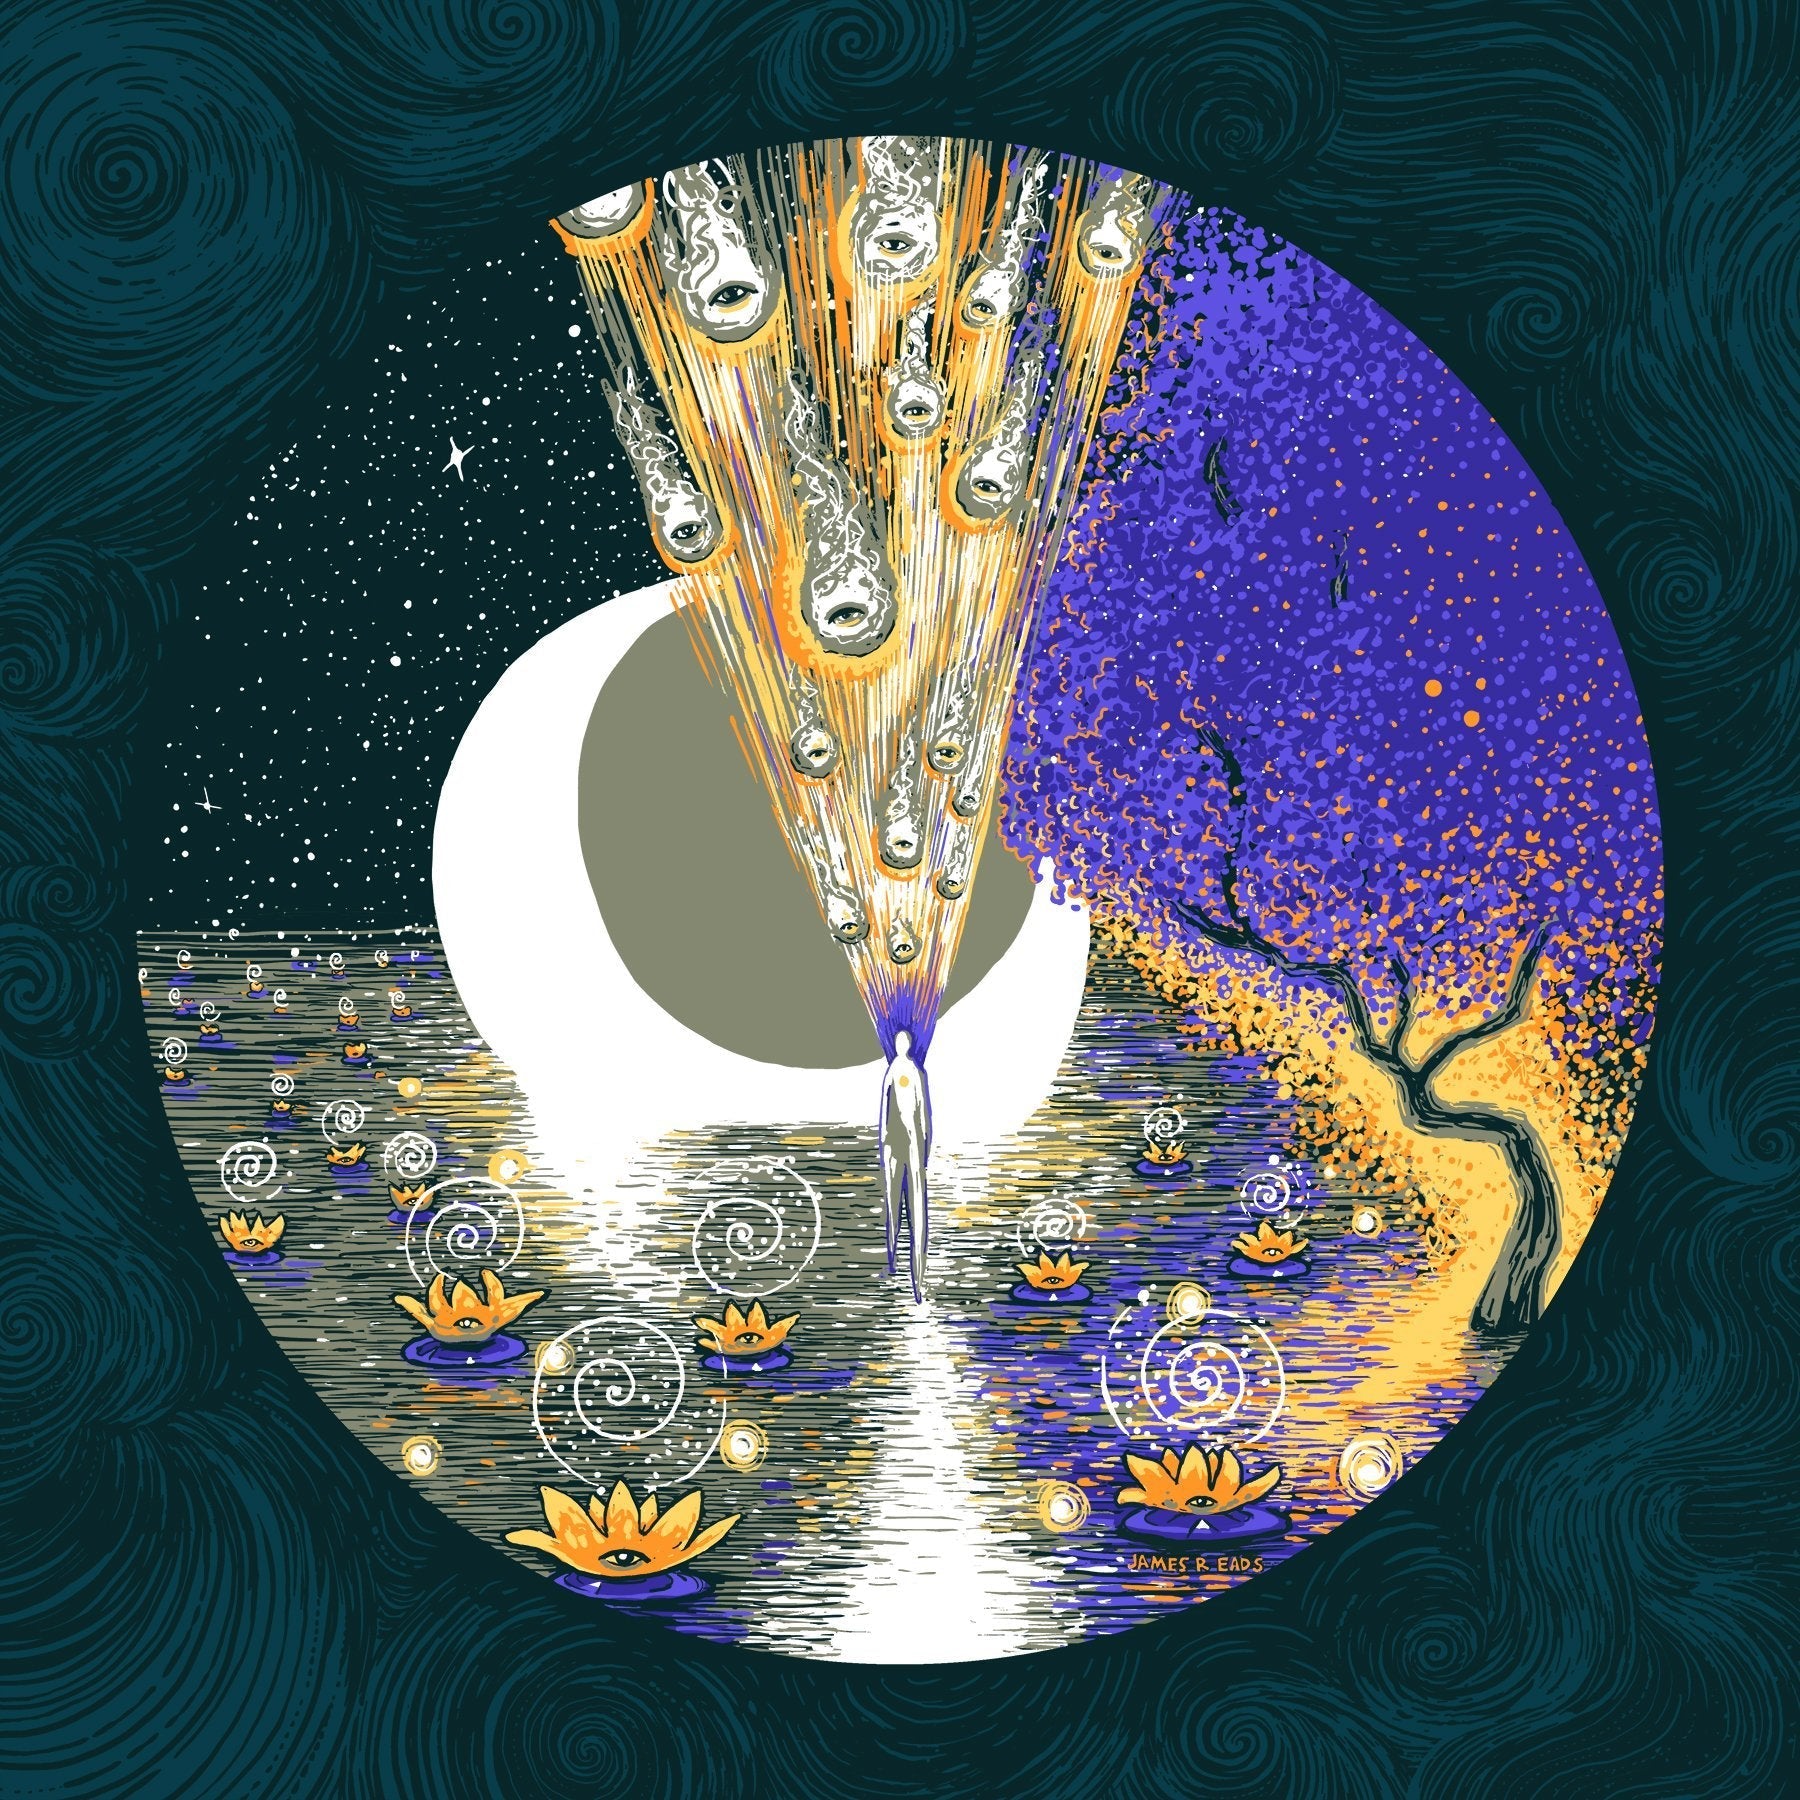 The Spirit Tree (Available at Posters 4 People) James R. Eads